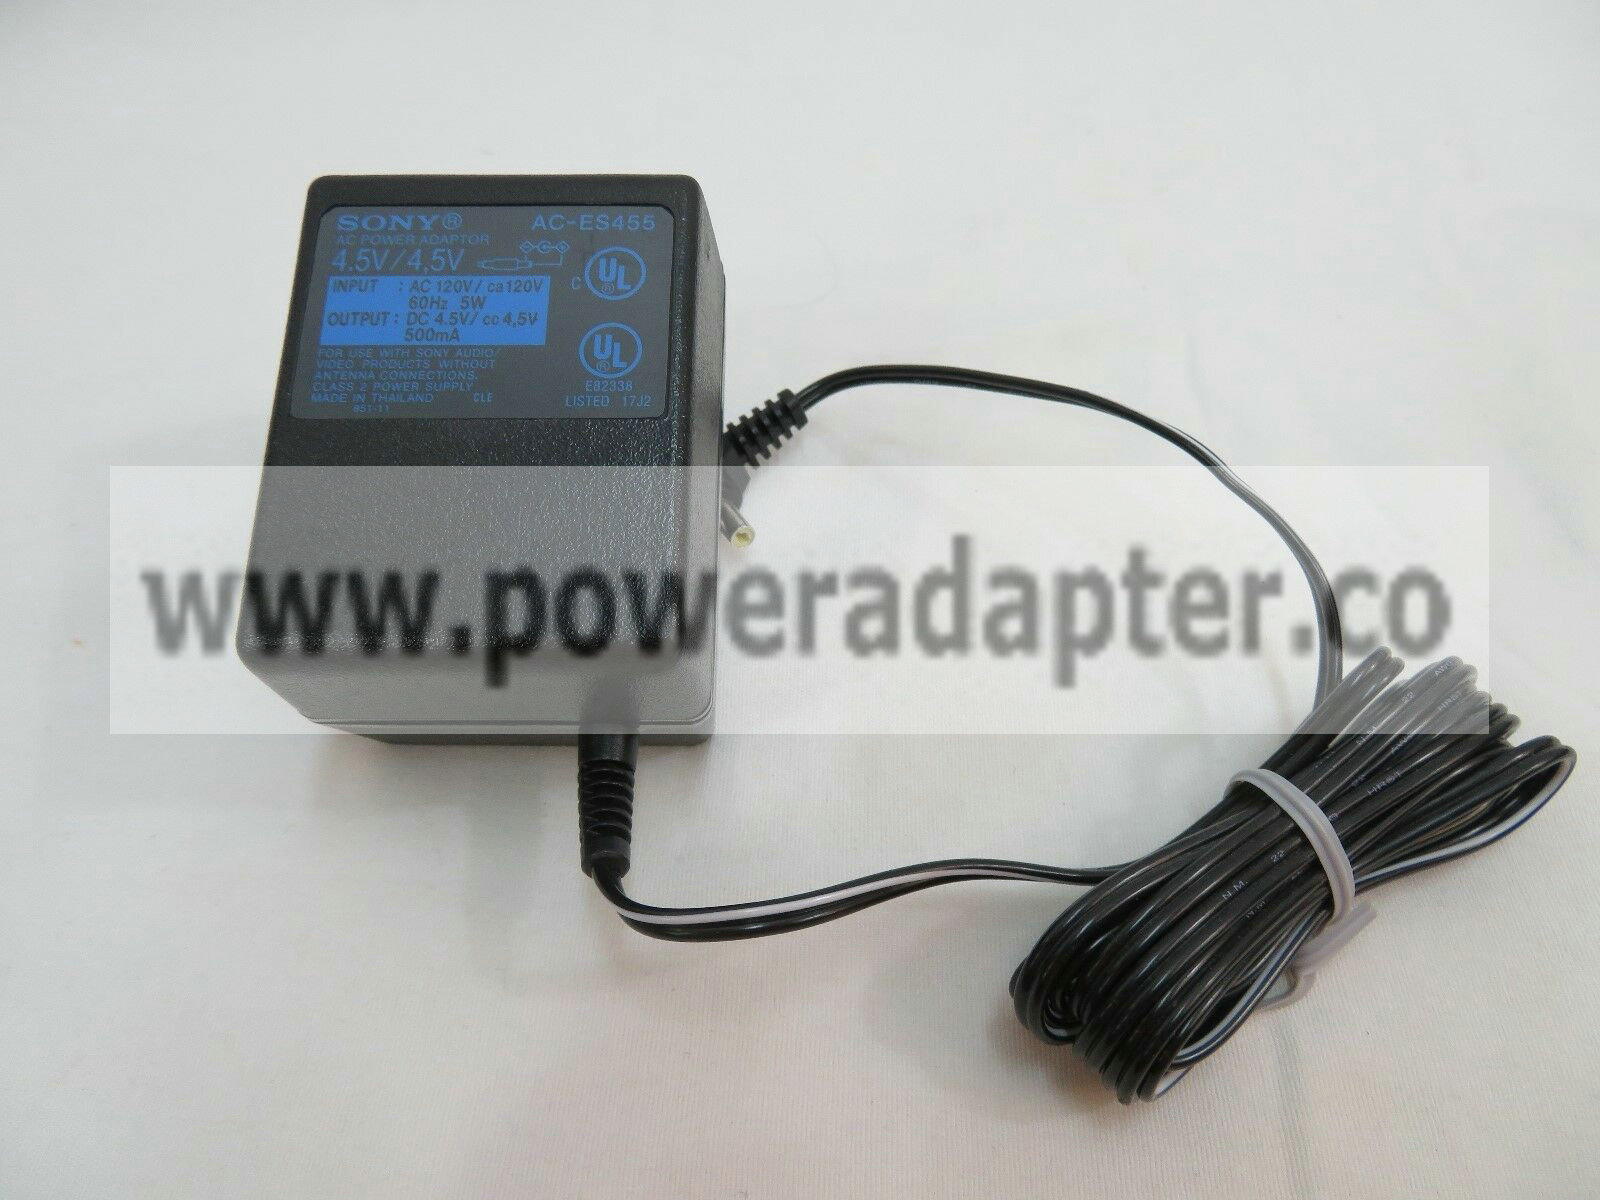 Sony AC-ES455 AC Adapter Power Cord Cable 4.5V 500mA Charger Model: AC-ES455 Brand: Sony MPN: AC-ES455 Output Vo